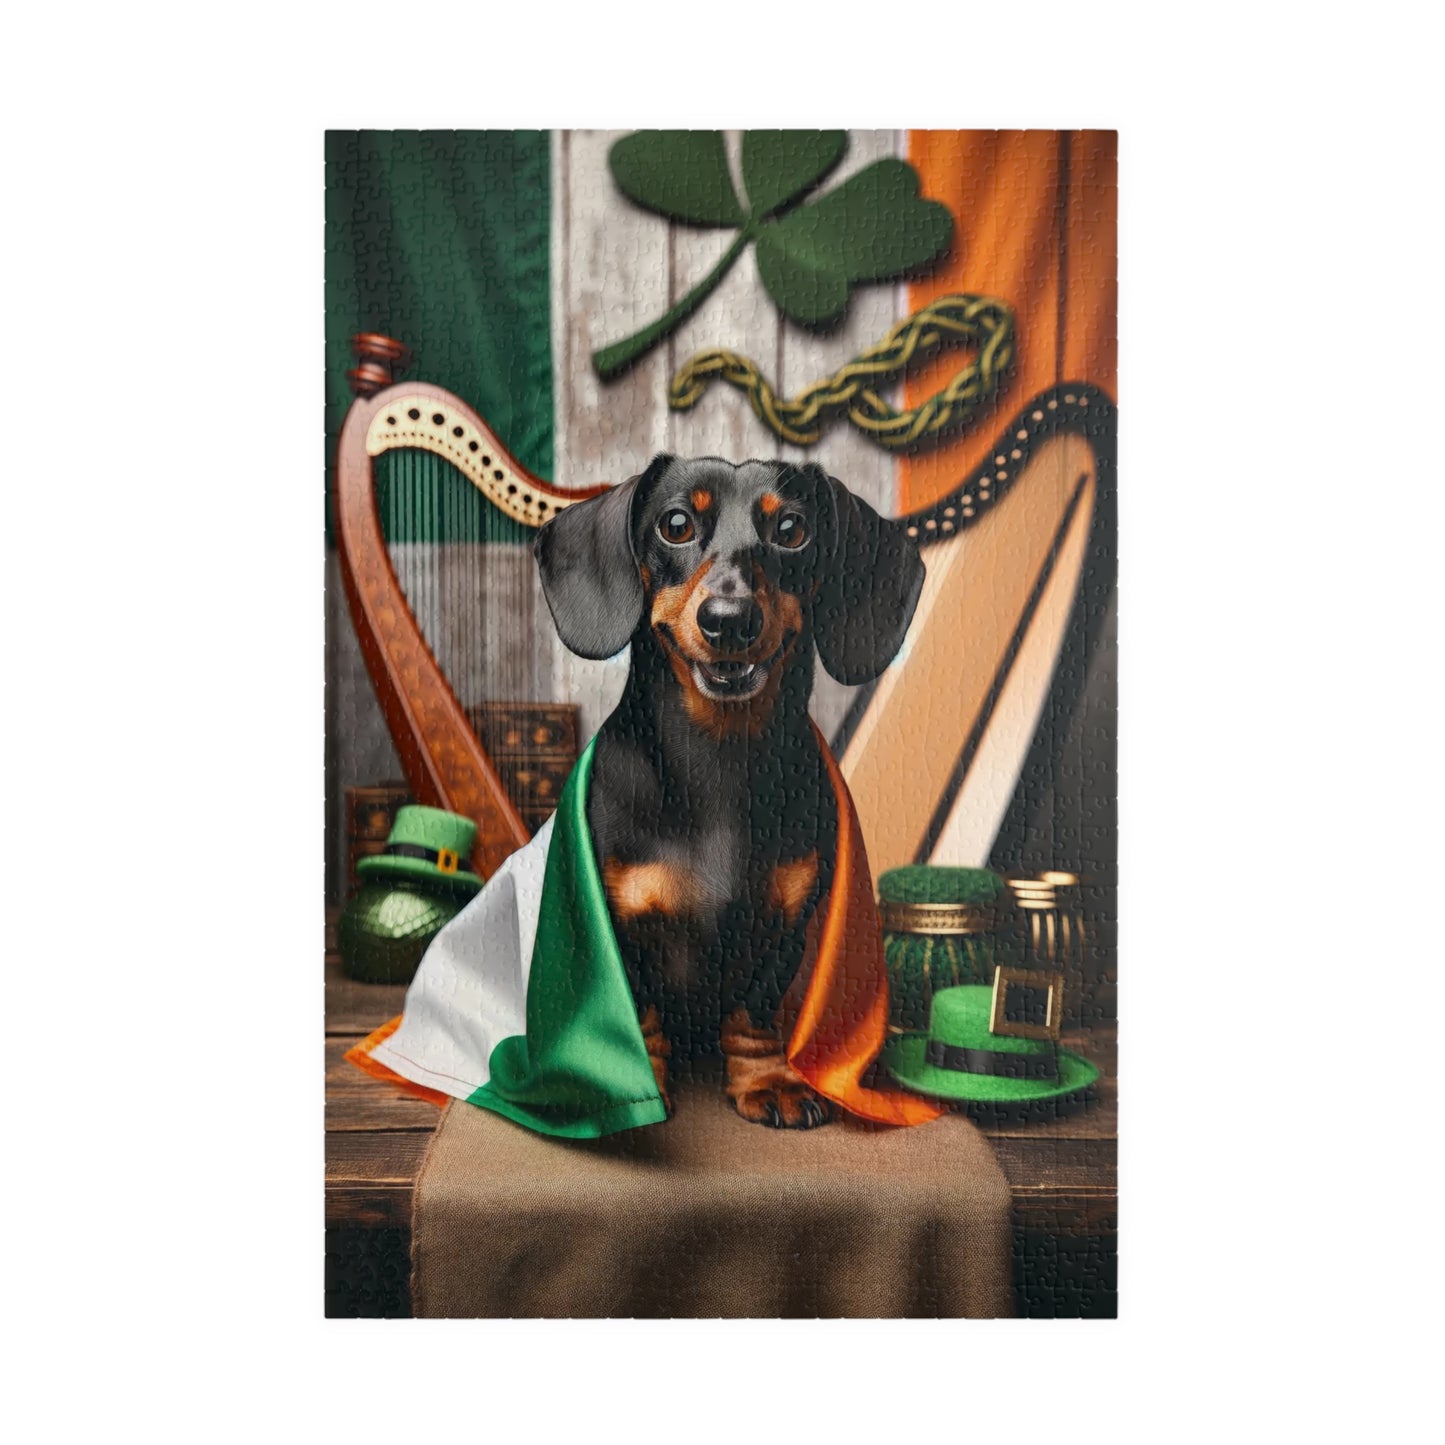 Lucky Doxie Miniature Dachshund Jigsaw Puzzle - St. Patrick's Day Themed Chocolate and Tan Smooth Mini Doxie 110, 252, 520 or 1014 Pieces